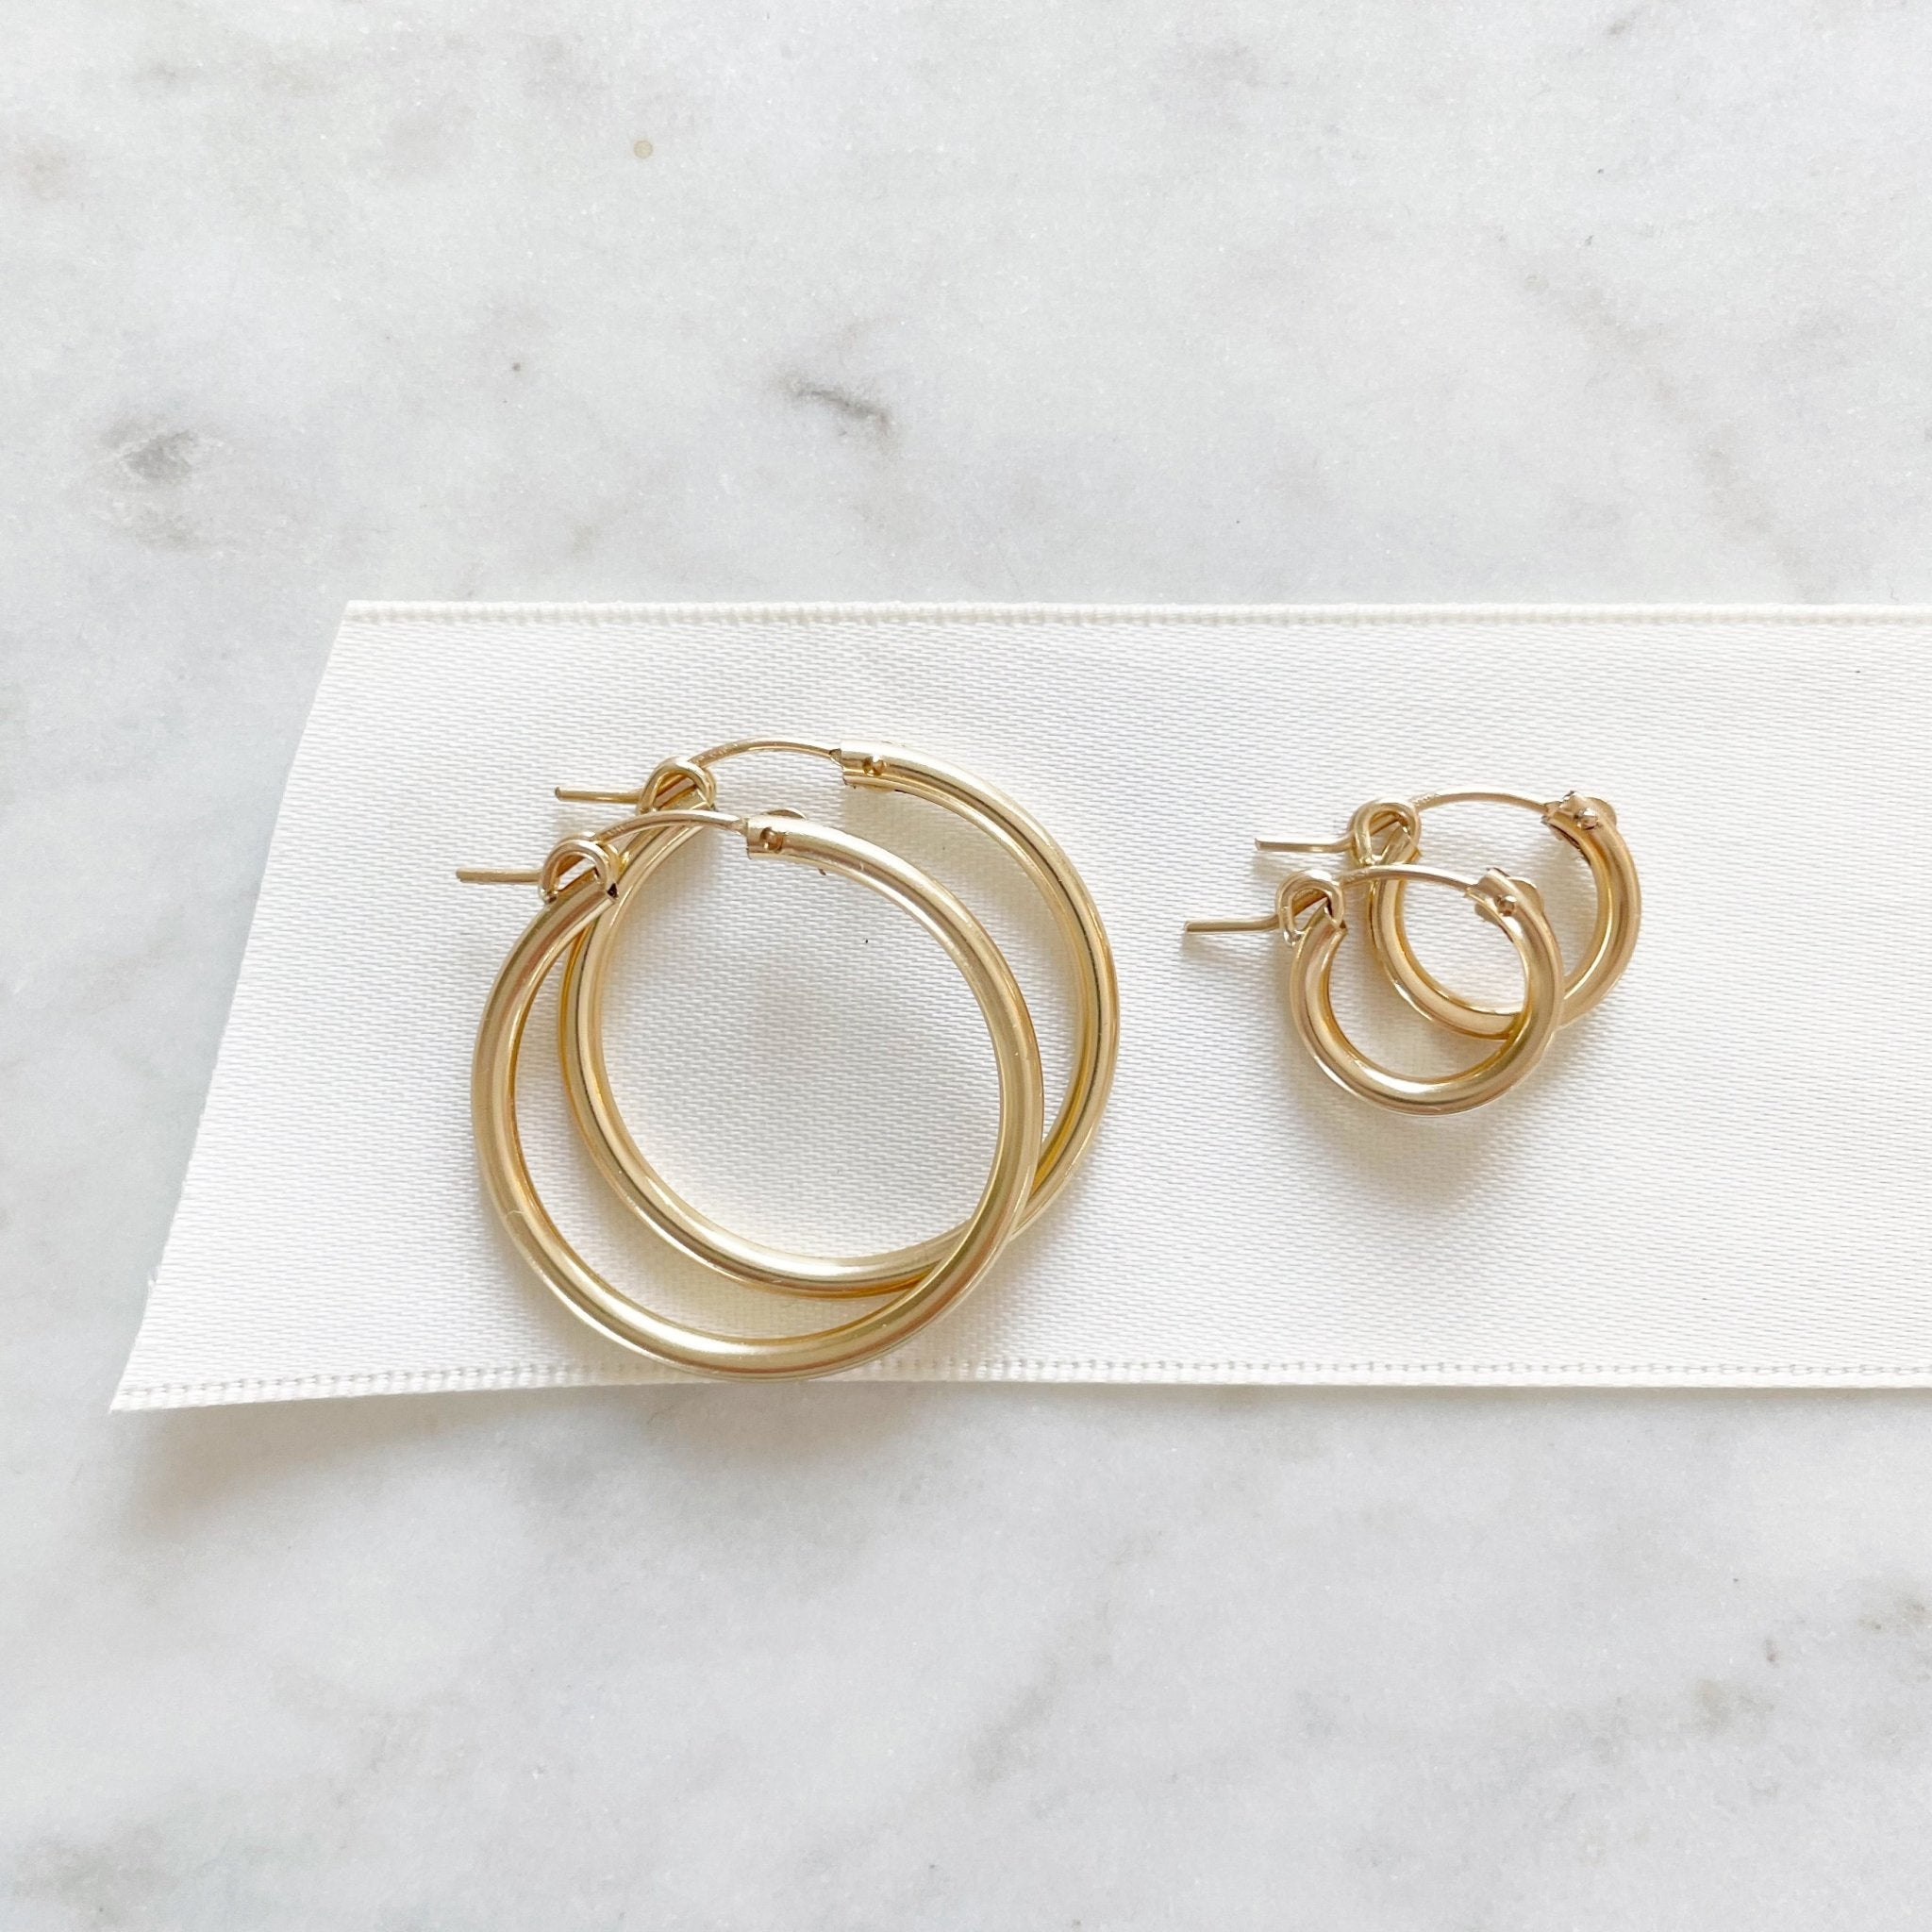 Gold Demi and Grande Hoops by Sarah Cornwell Jewelry.  Large and small simple, everyday gold hoop earrings on a white background.